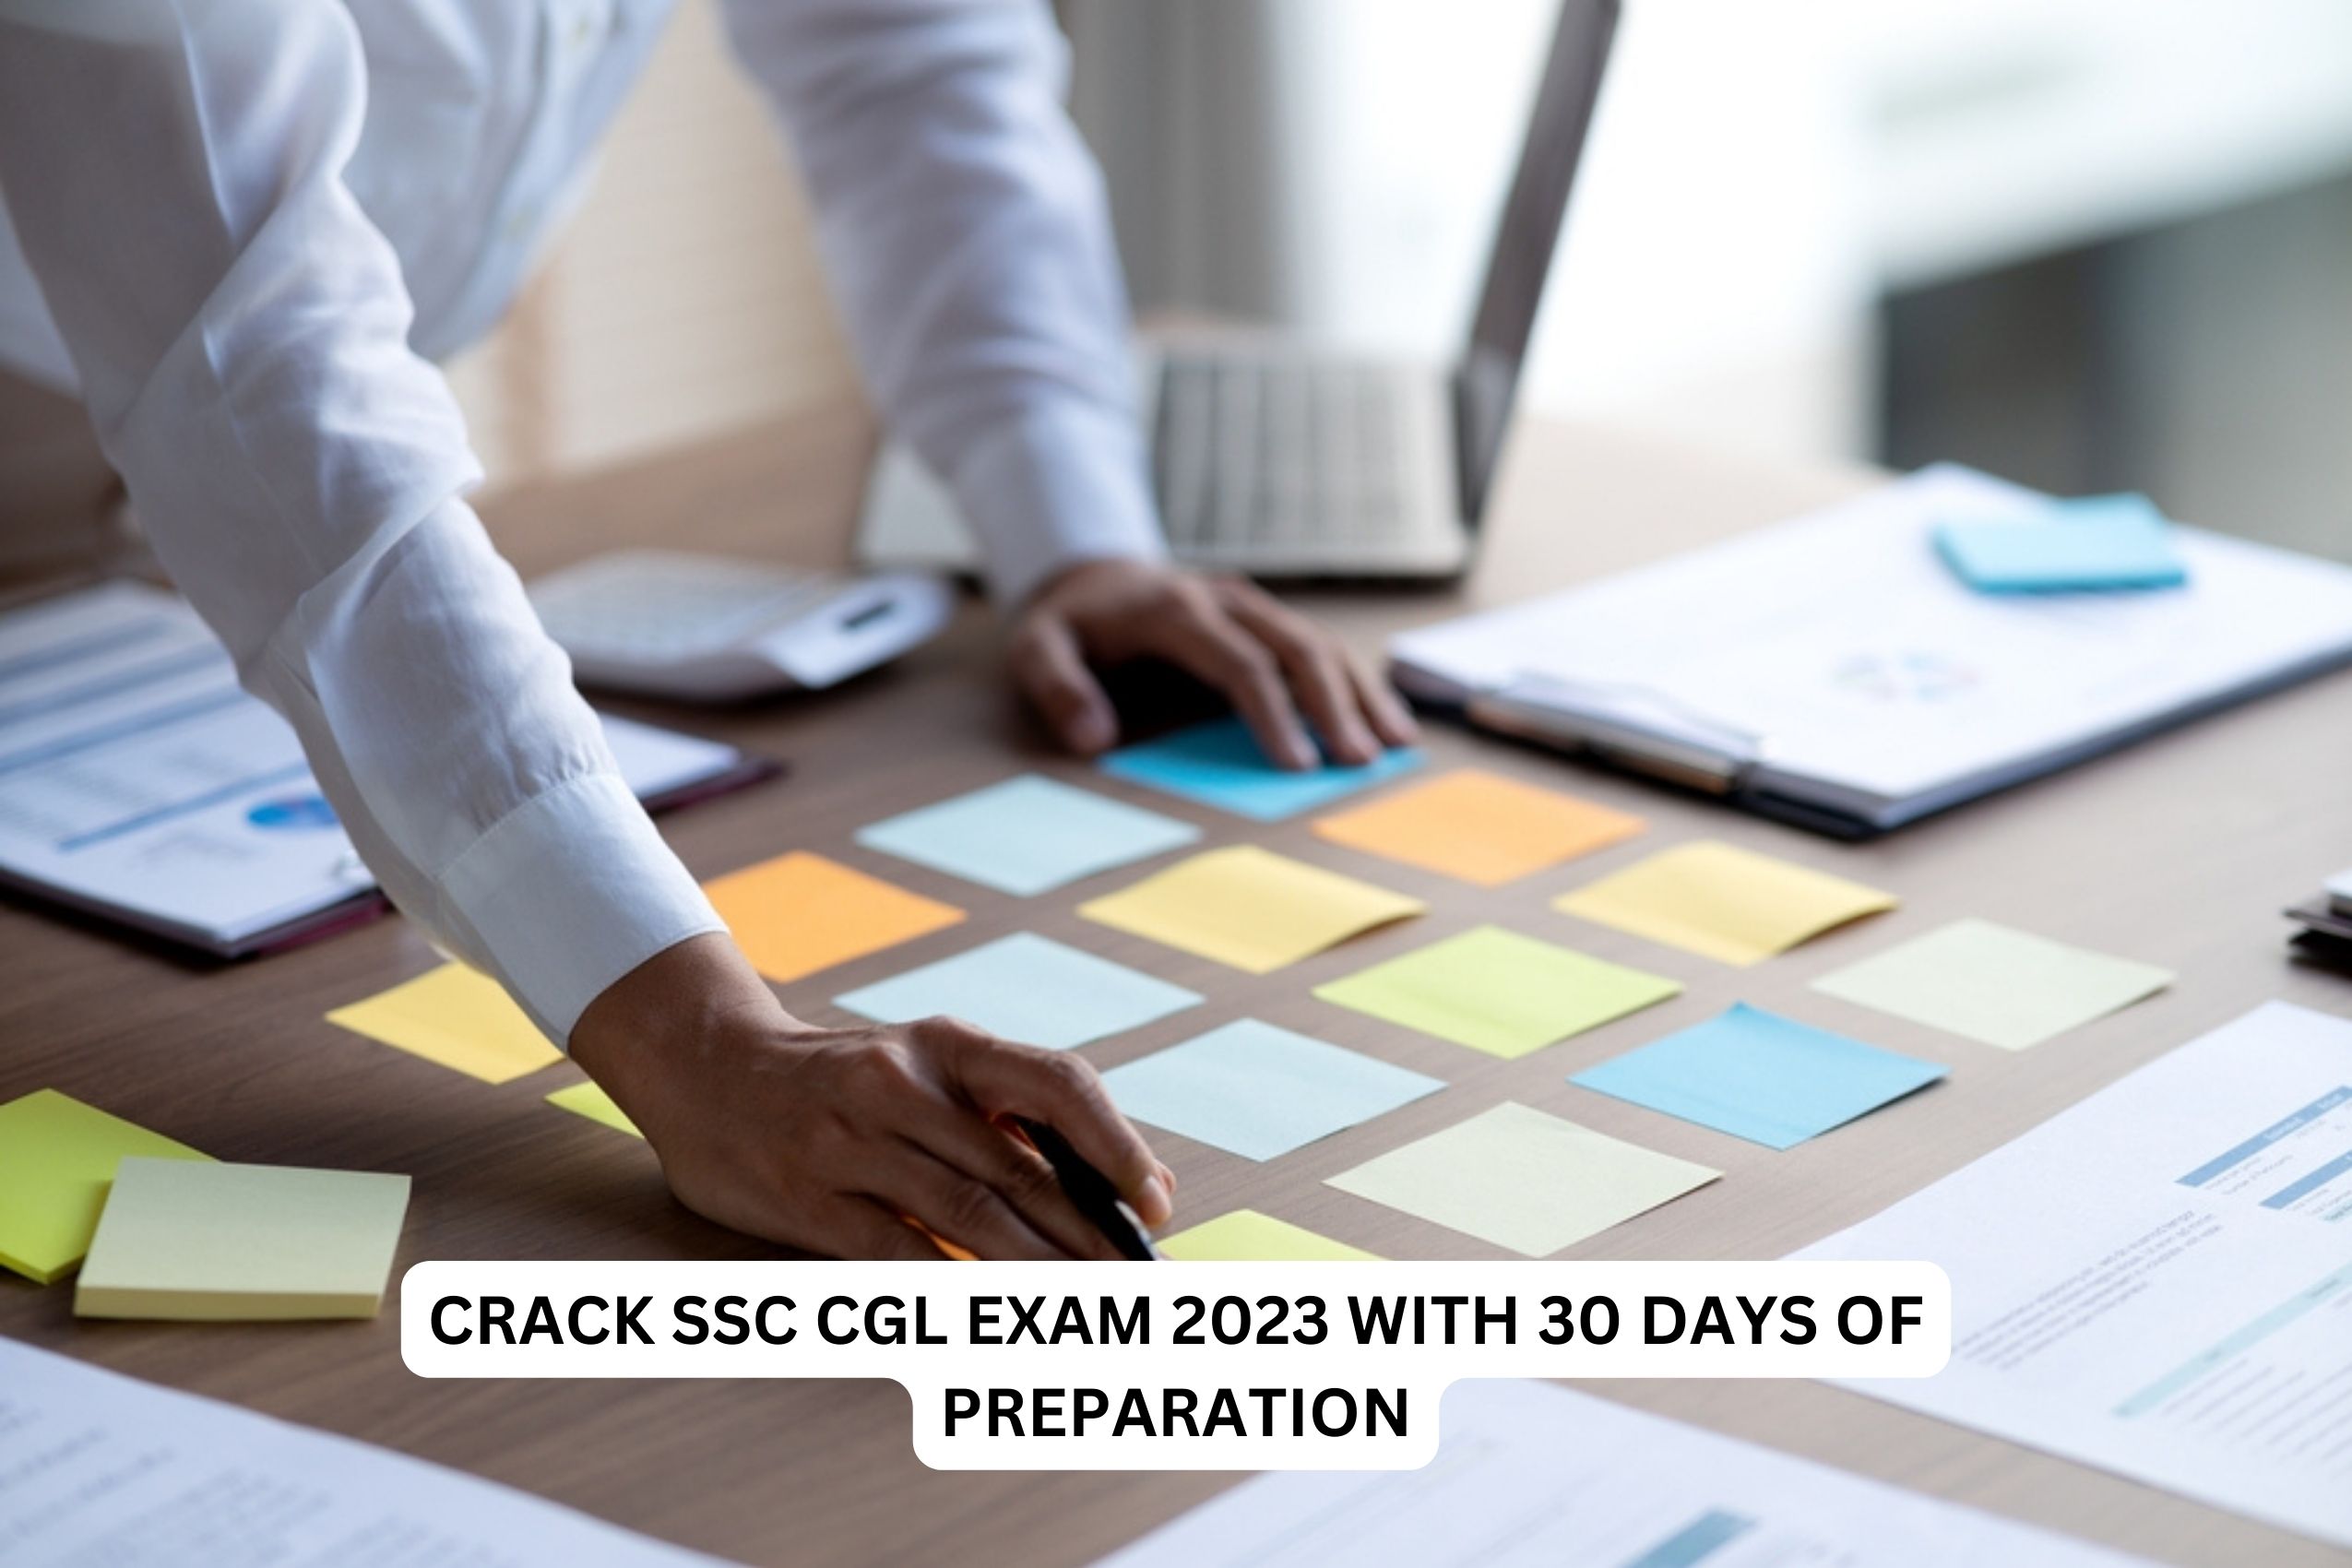 Crack SSC CGL Exam 2023 With 30 Days Of Preparation